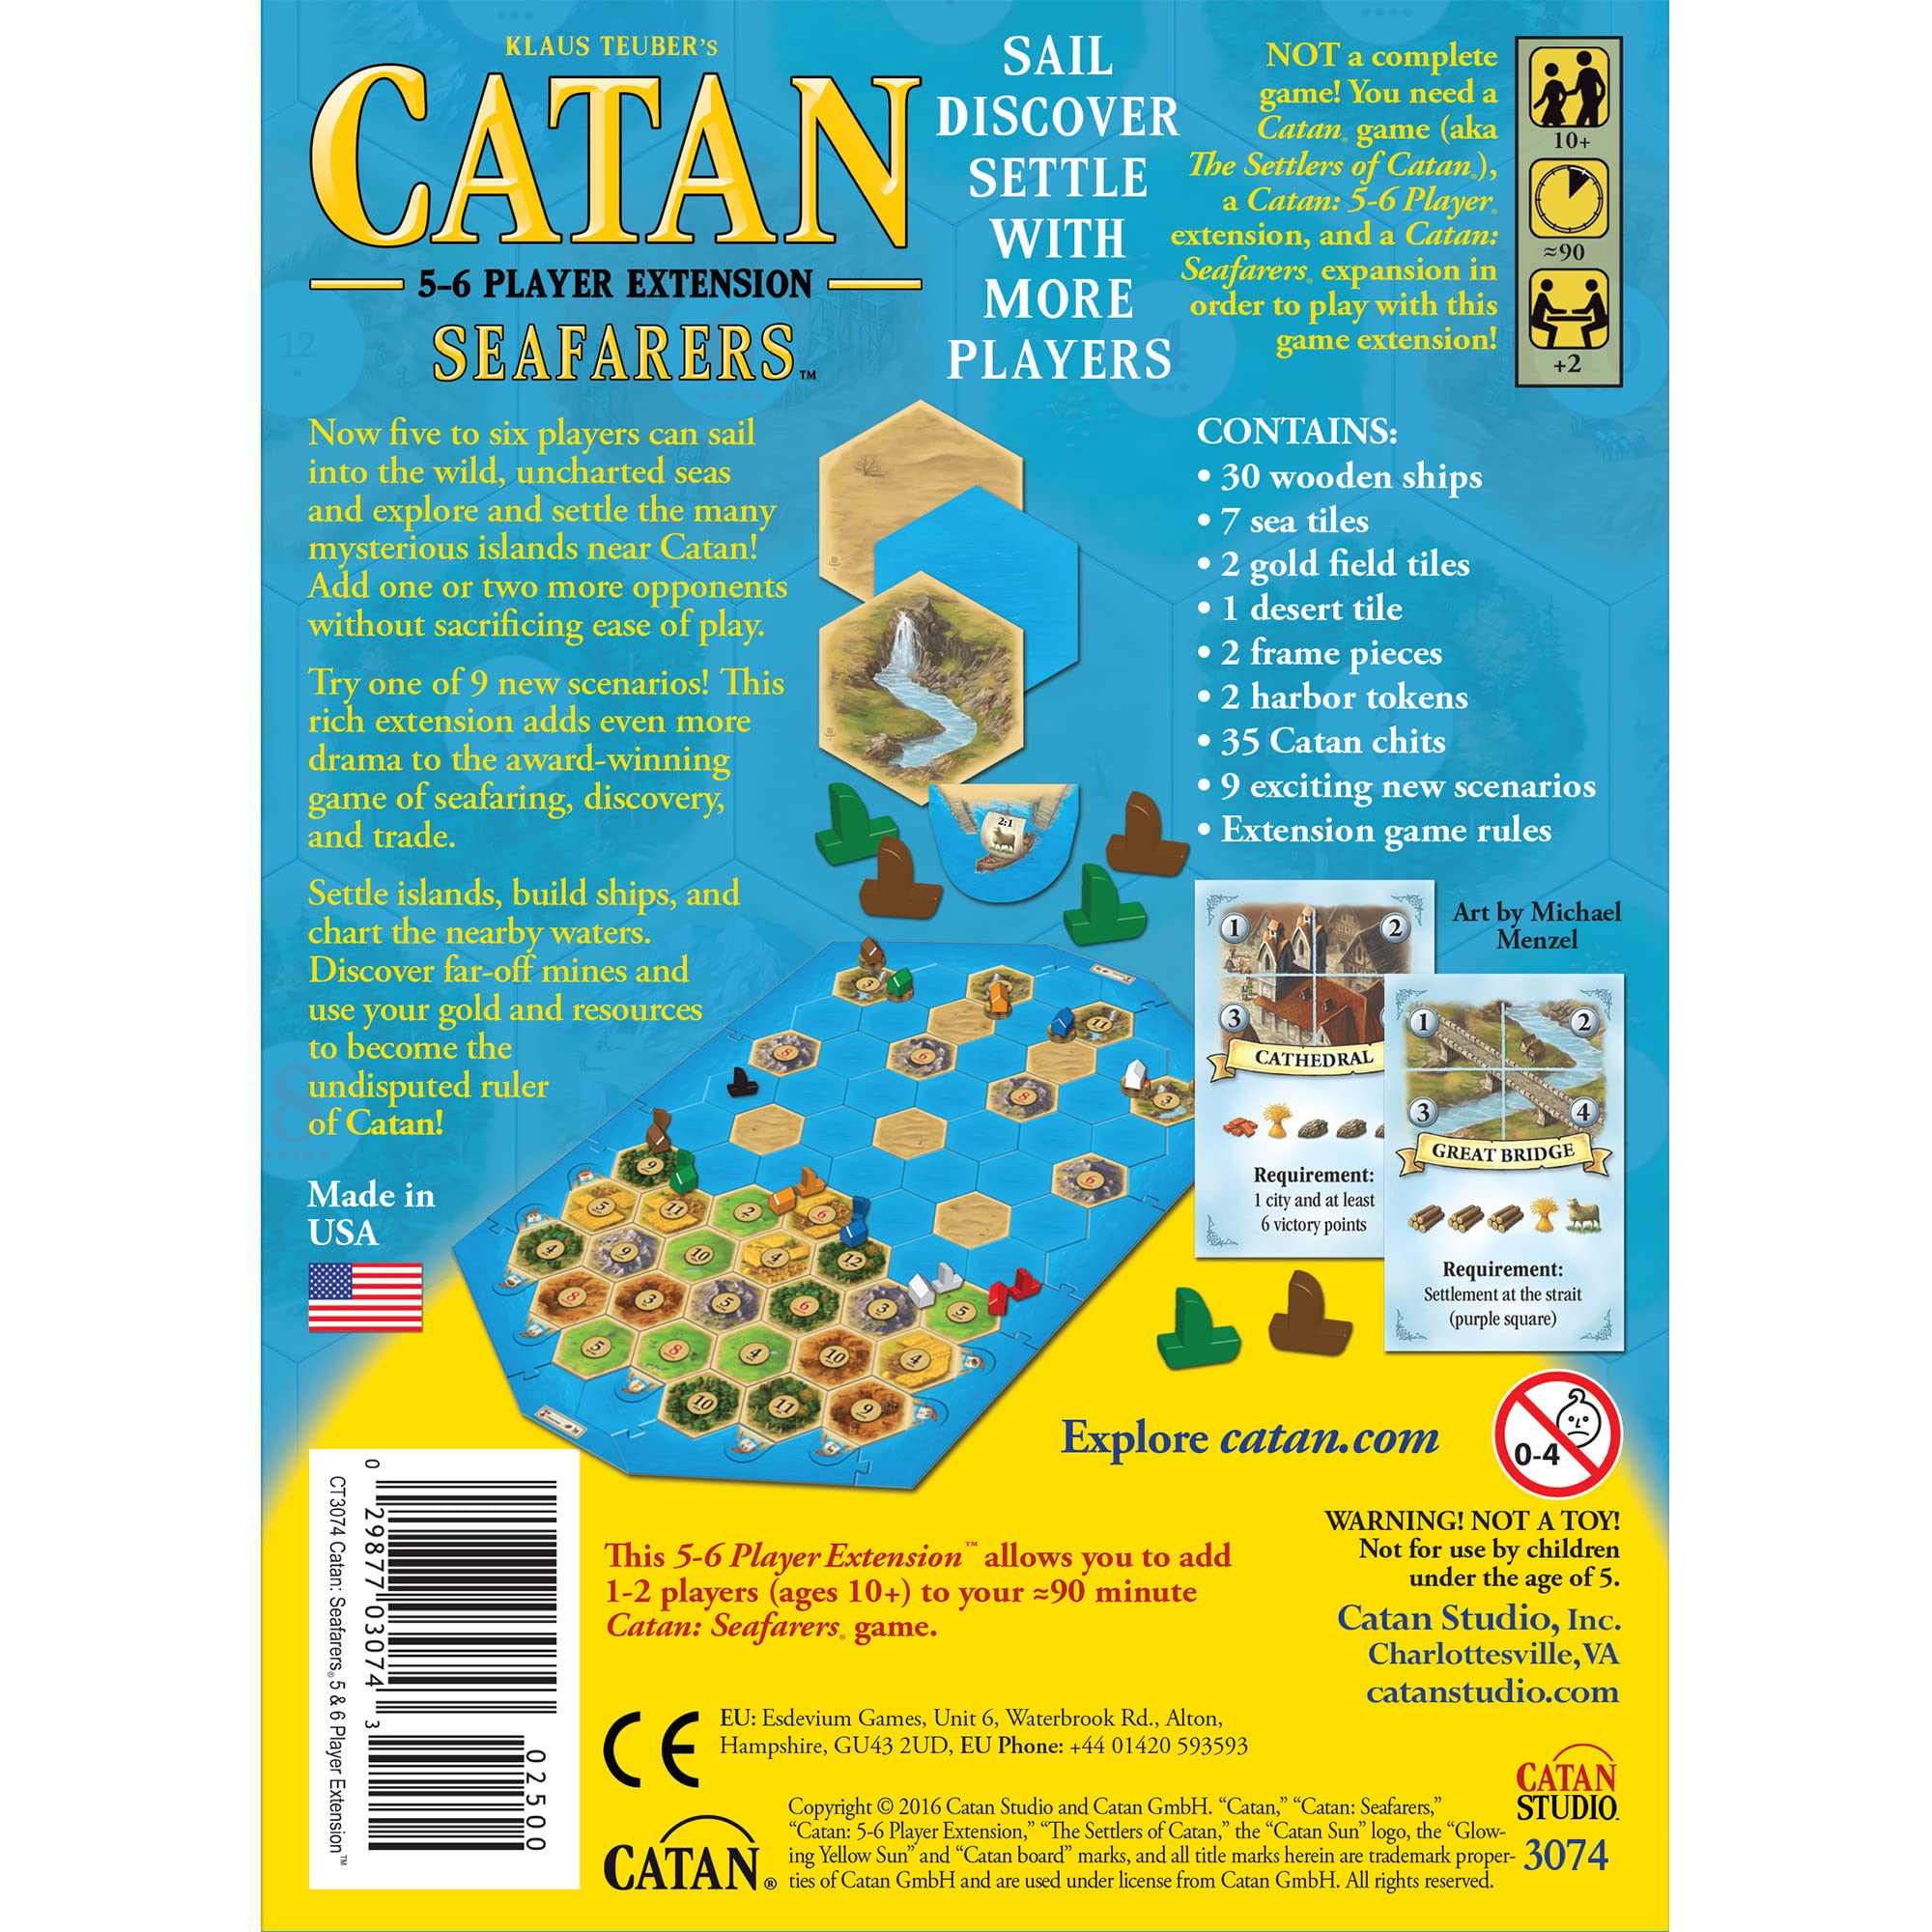 CATAN Seafarers Board Game Extension Allowing a Total of 5 to 6 Players for The CATAN Seafarer Expansion | Board Game for Adults and Family | Adventure Board Game | Made by Catan Studio